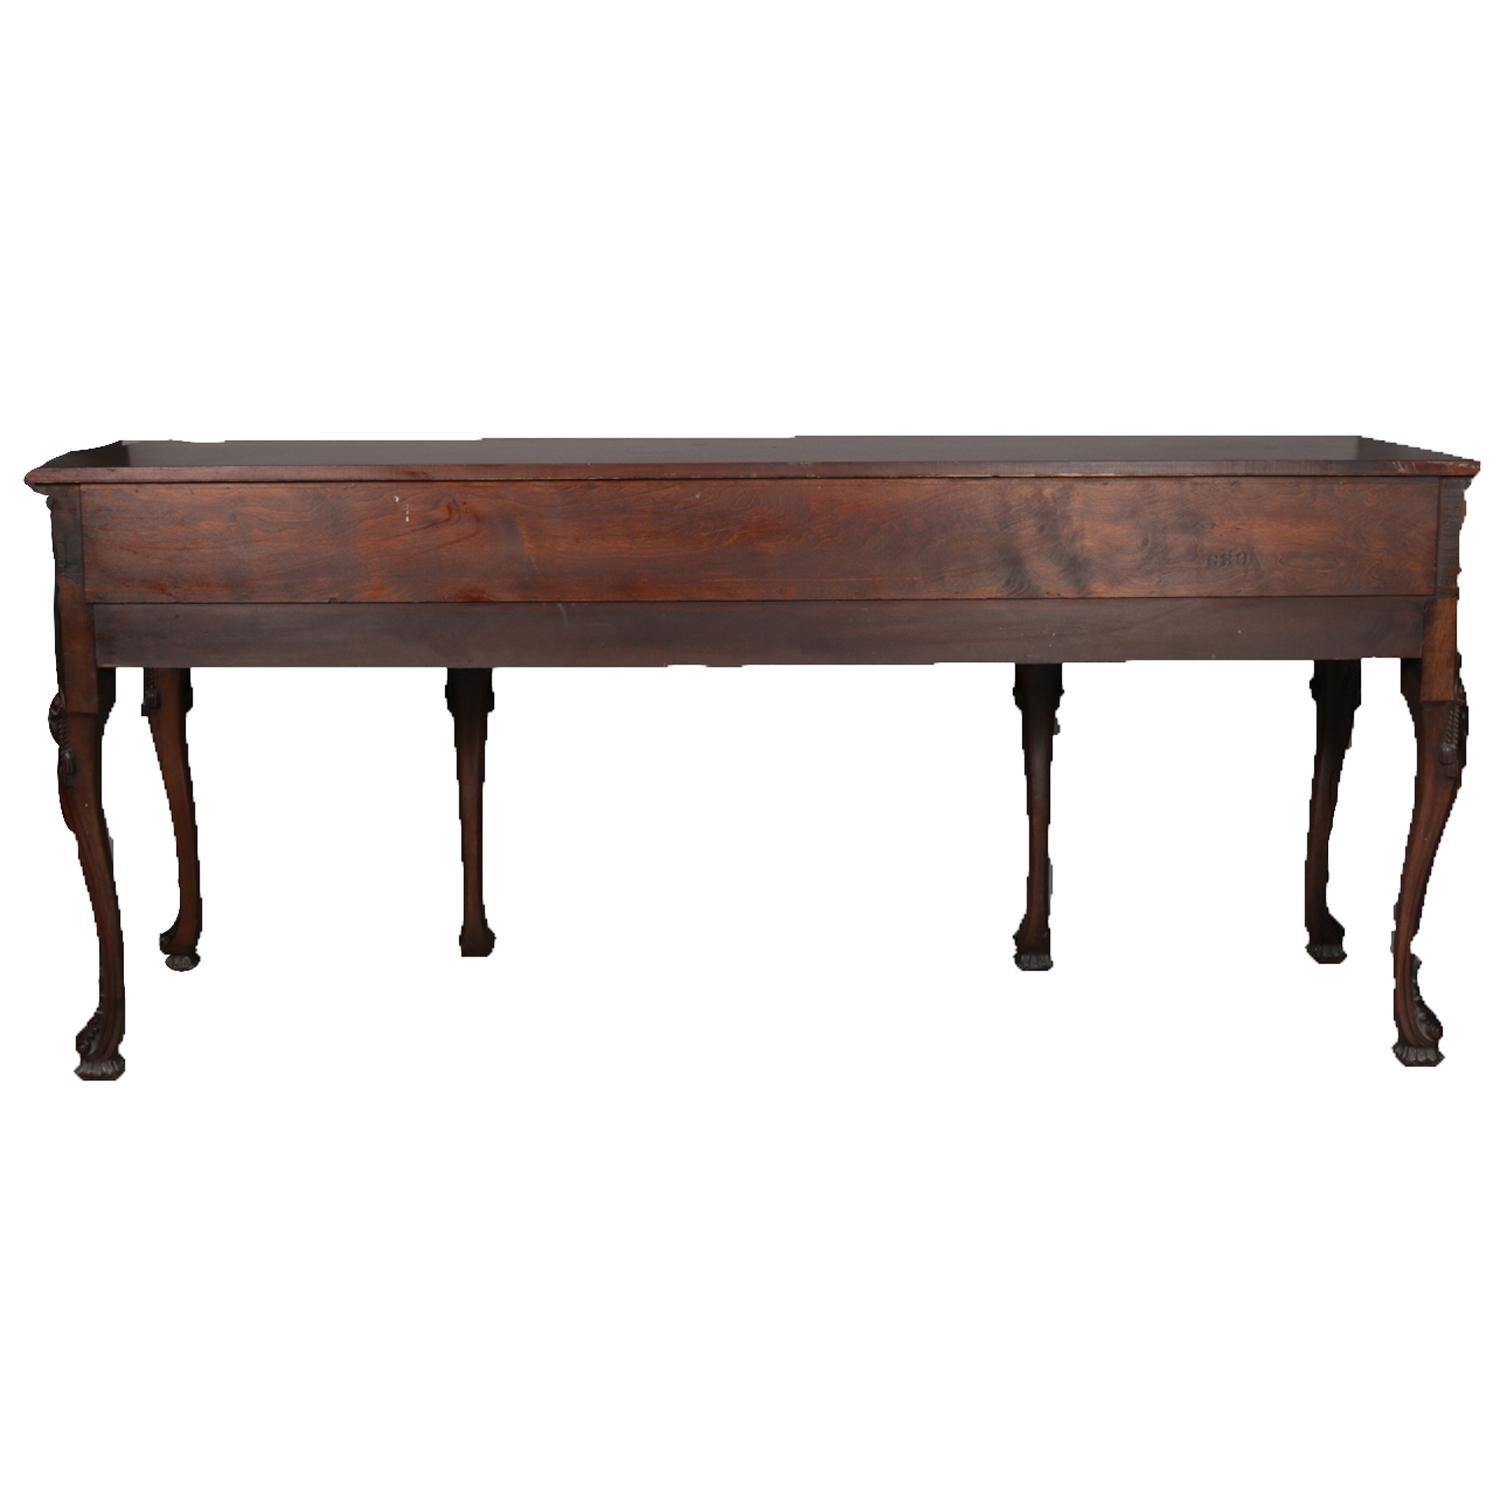 Hand-Carved Antique French Deeply Carved Walnut Sideboard, 20th Century